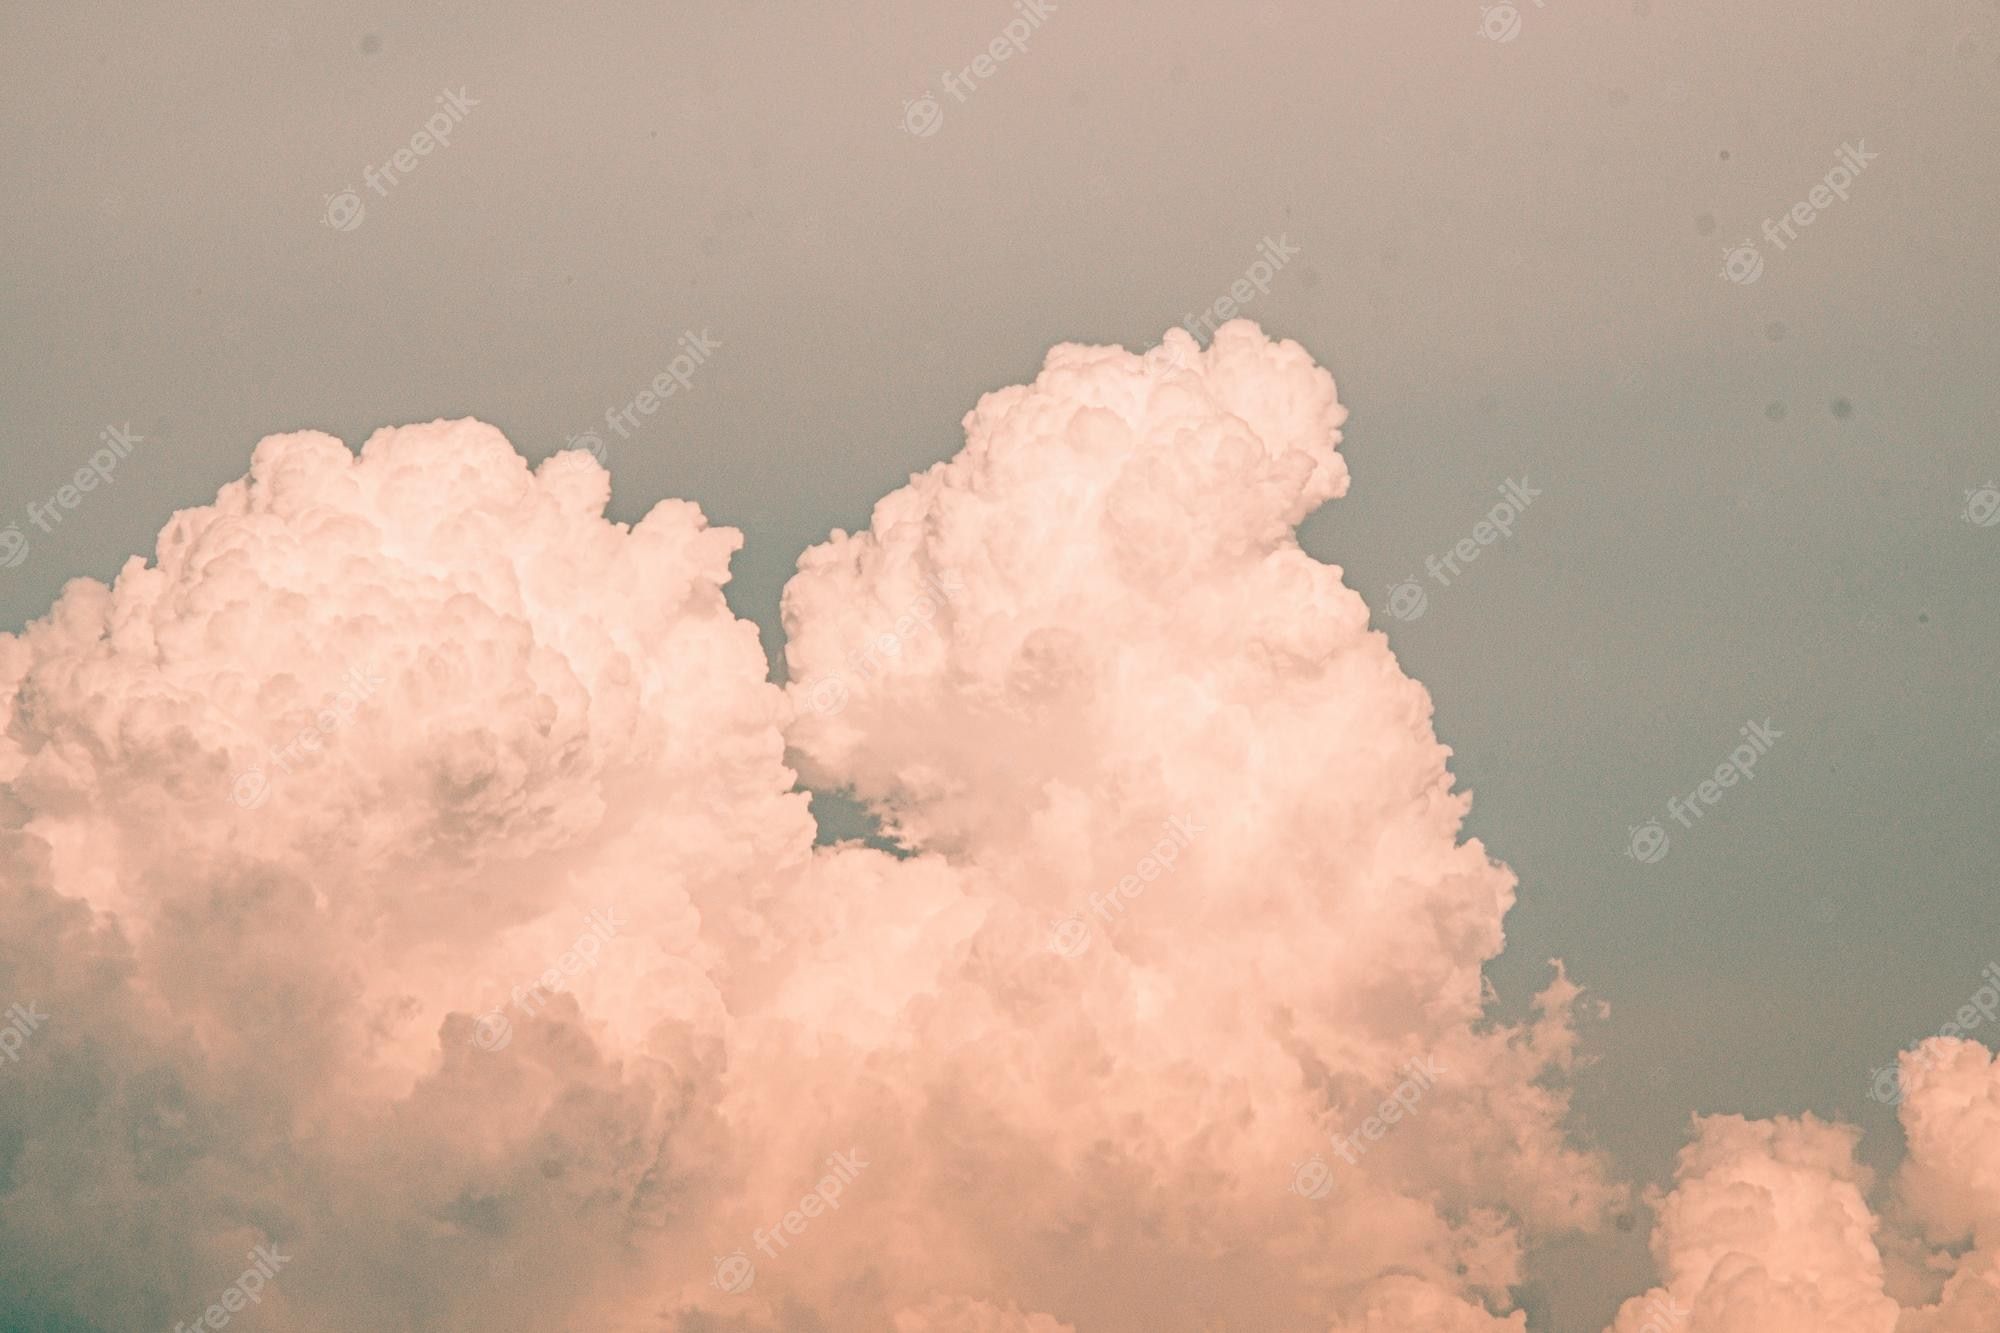 Background Aesthetic Clouds Image